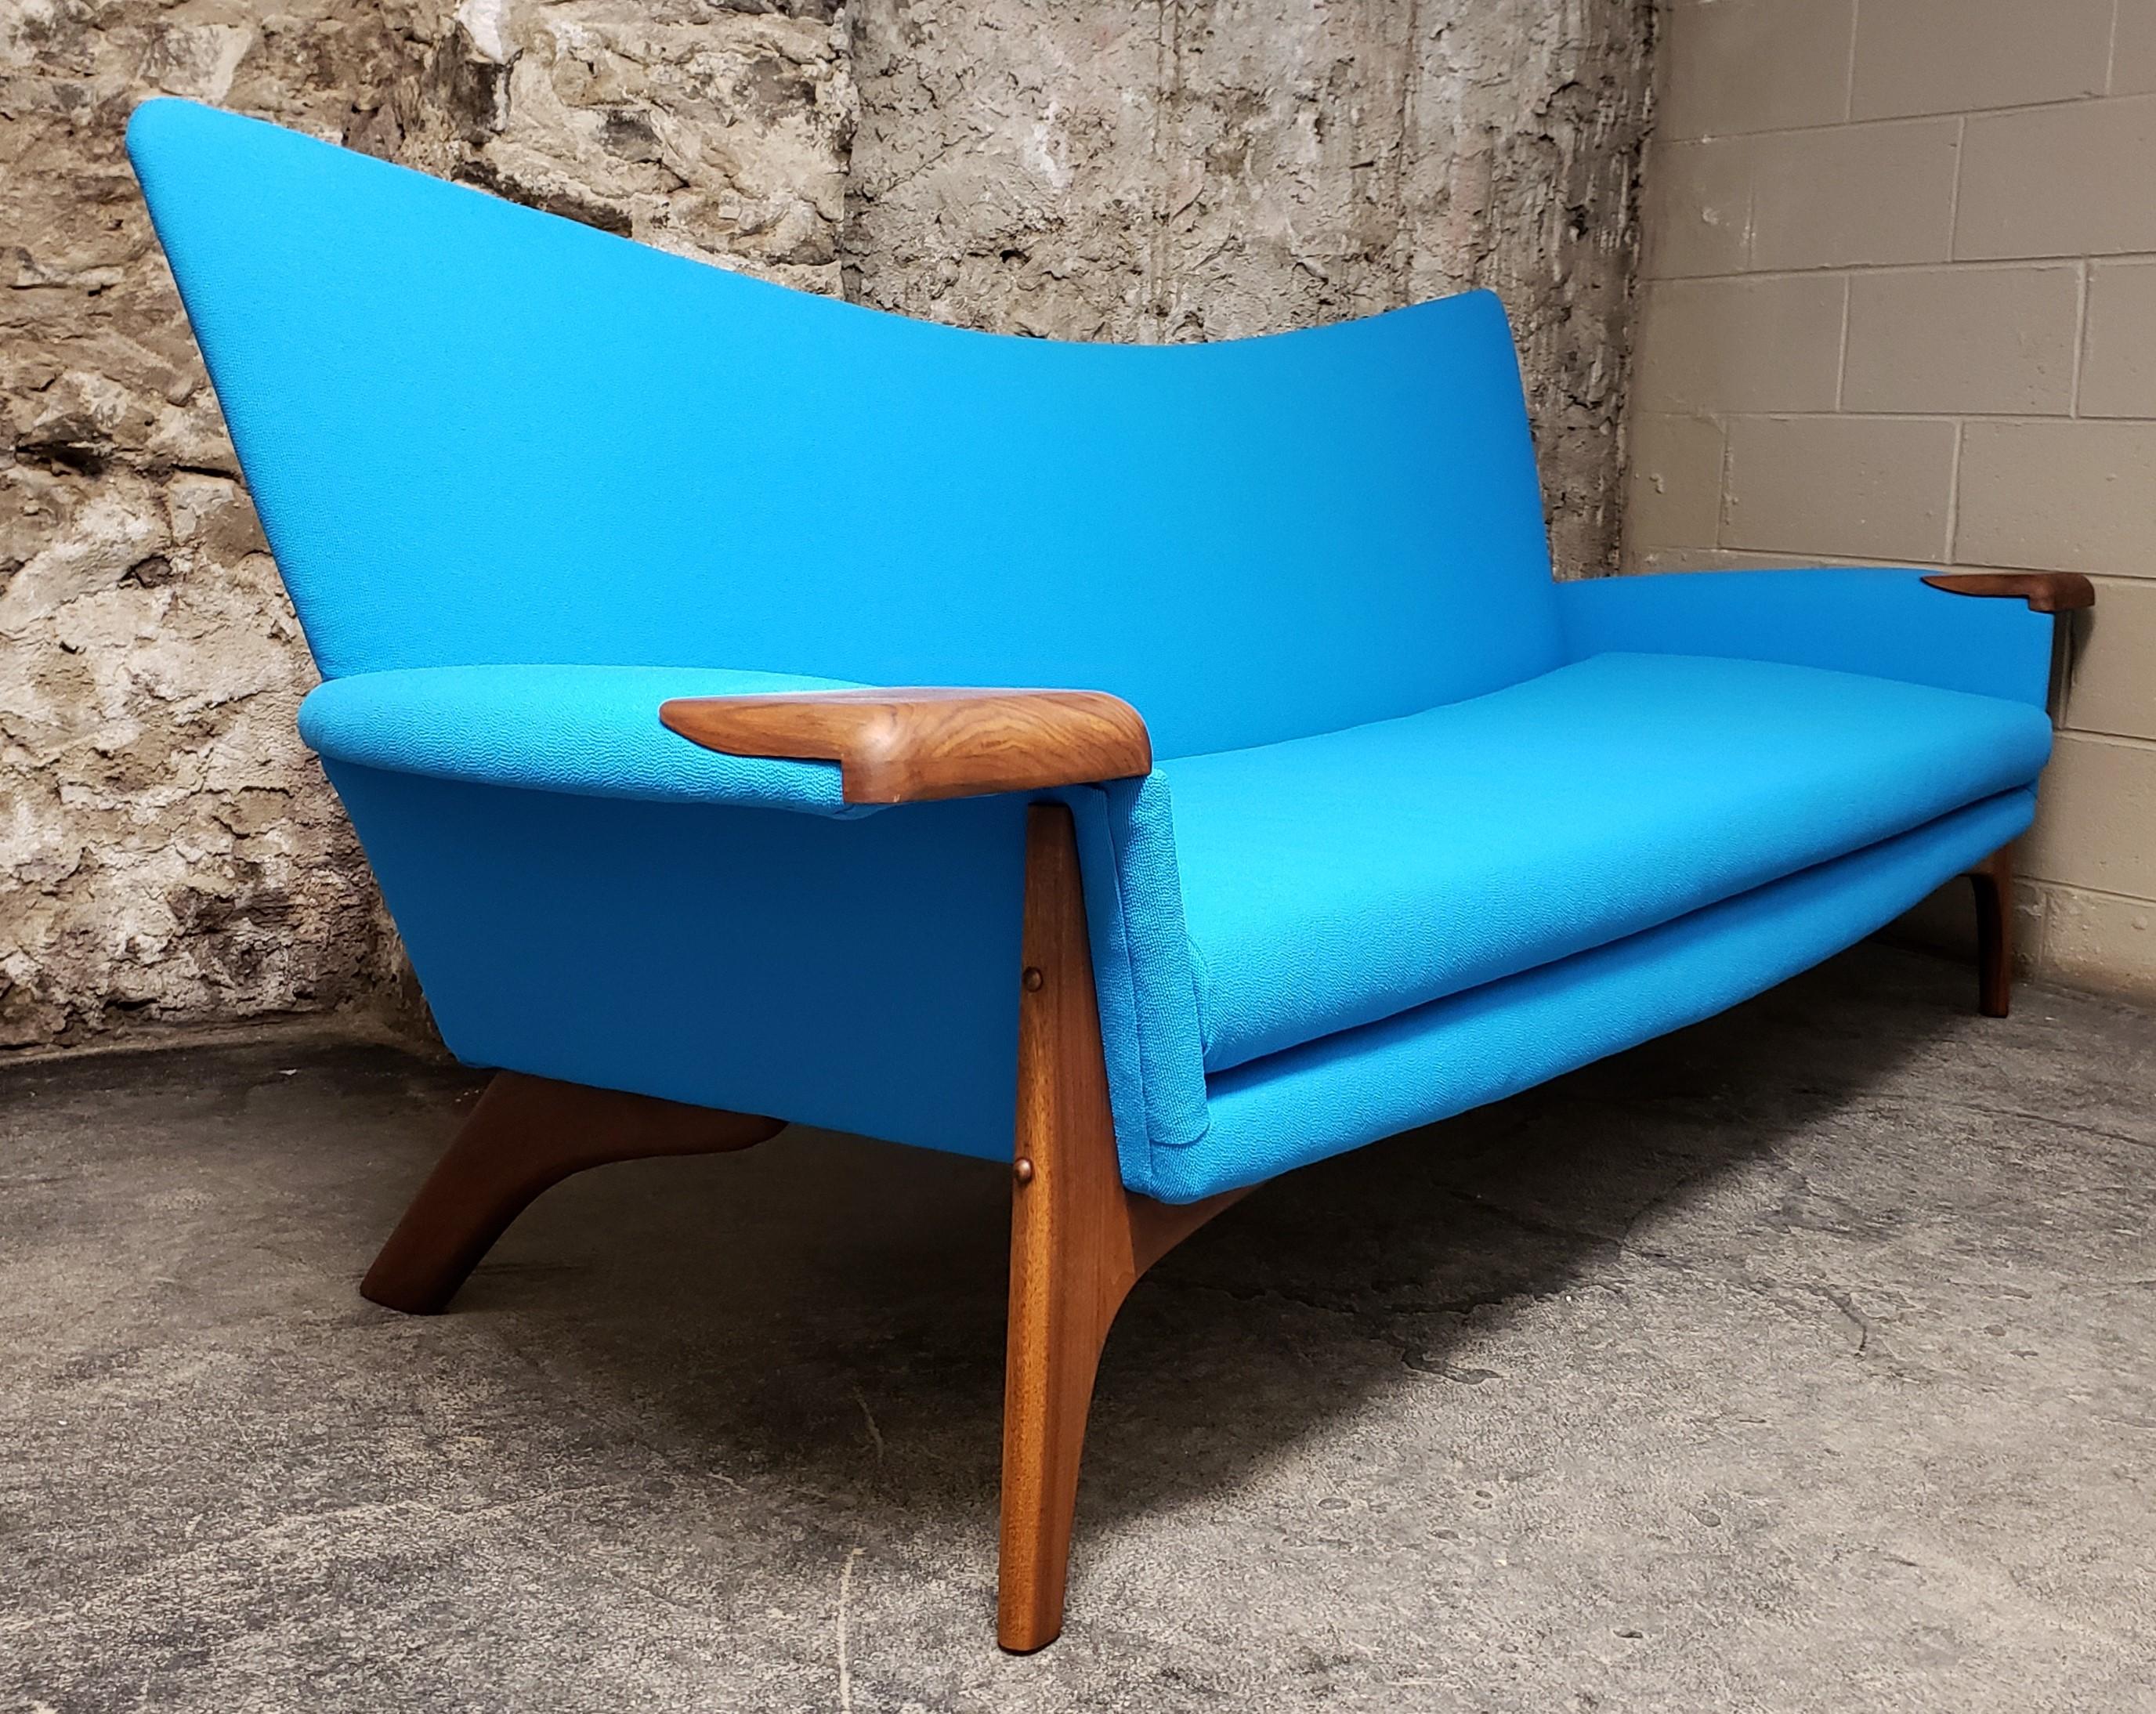 Mid-Century Modern sofa designed by Adrian Pearsall for Craft Associates. The modernist form has been newly upholstered in a striking Maharam fabric. It also features walnut accents on the arms as well as a walnut frame with rich and vibrant wood